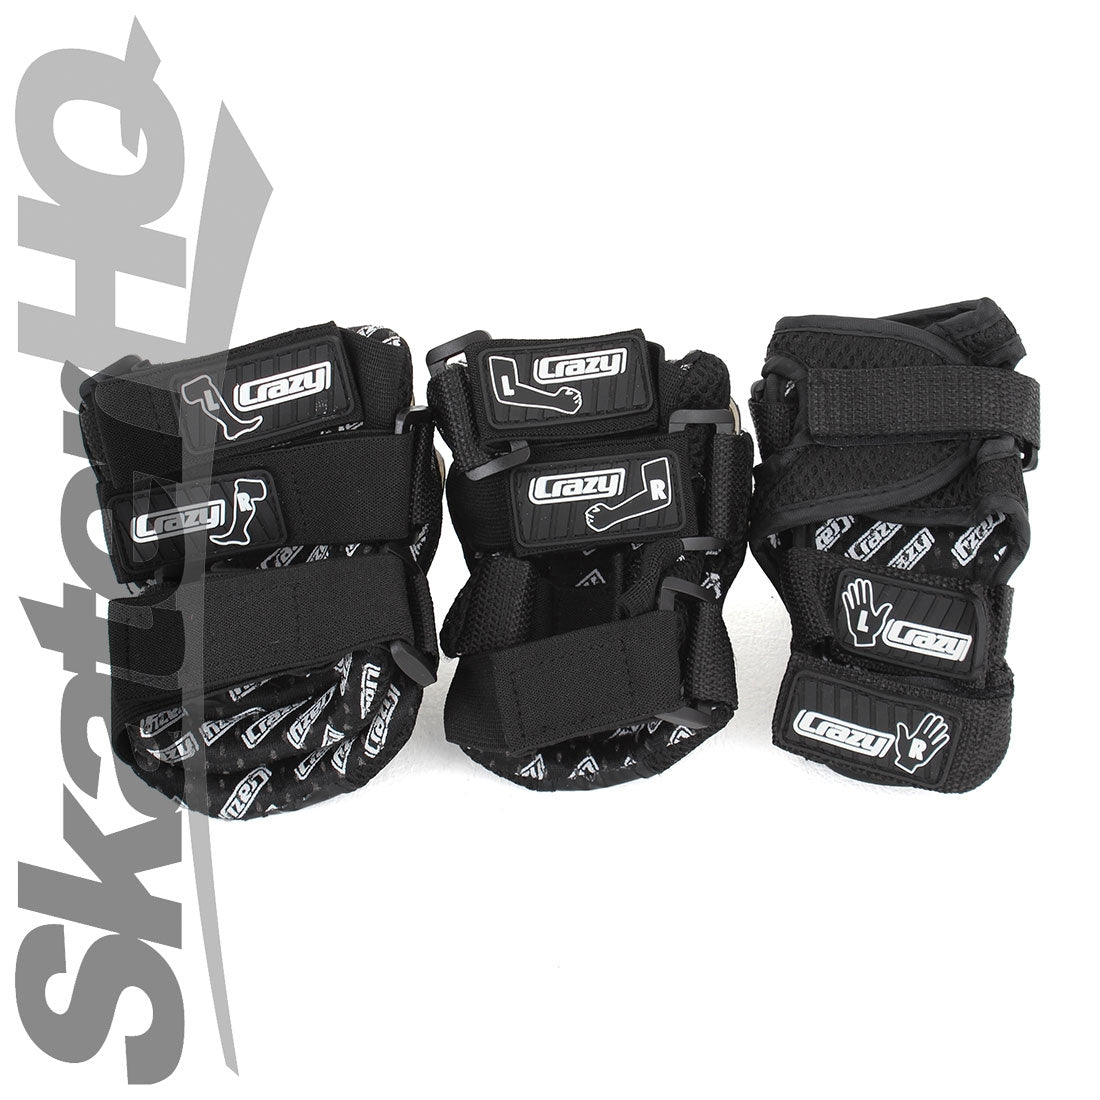 Crazy ProteXion Kids Tri-Pack - Black Protective Gear